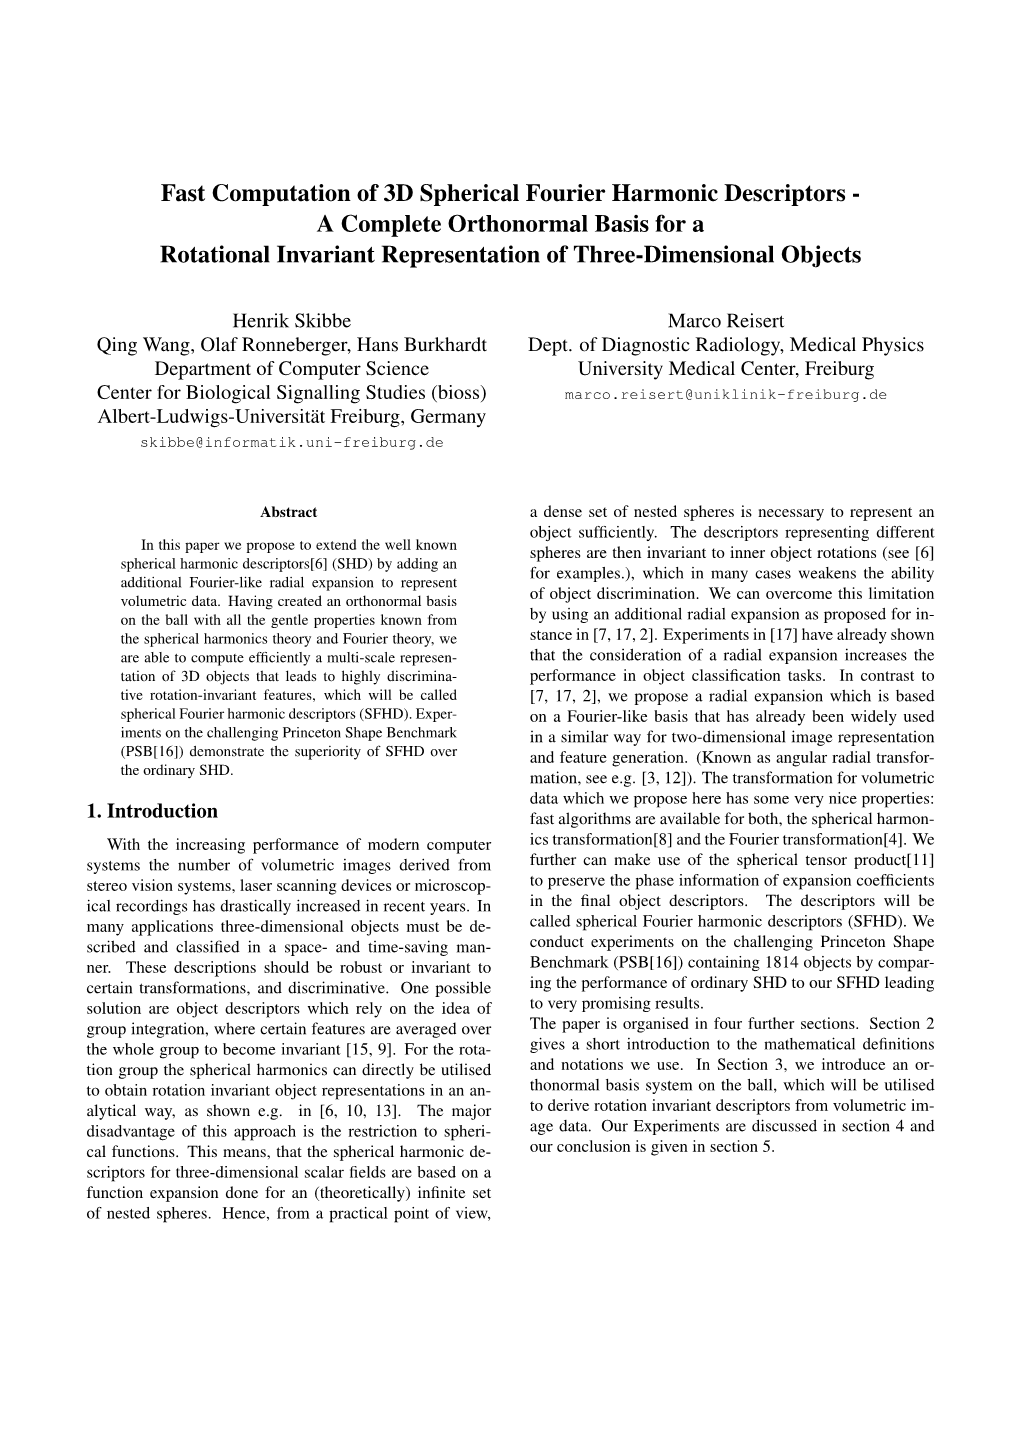 Fast Computation of 3D Spherical Fourier Harmonic Descriptors - a Complete Orthonormal Basis for a Rotational Invariant Representation of Three-Dimensional Objects